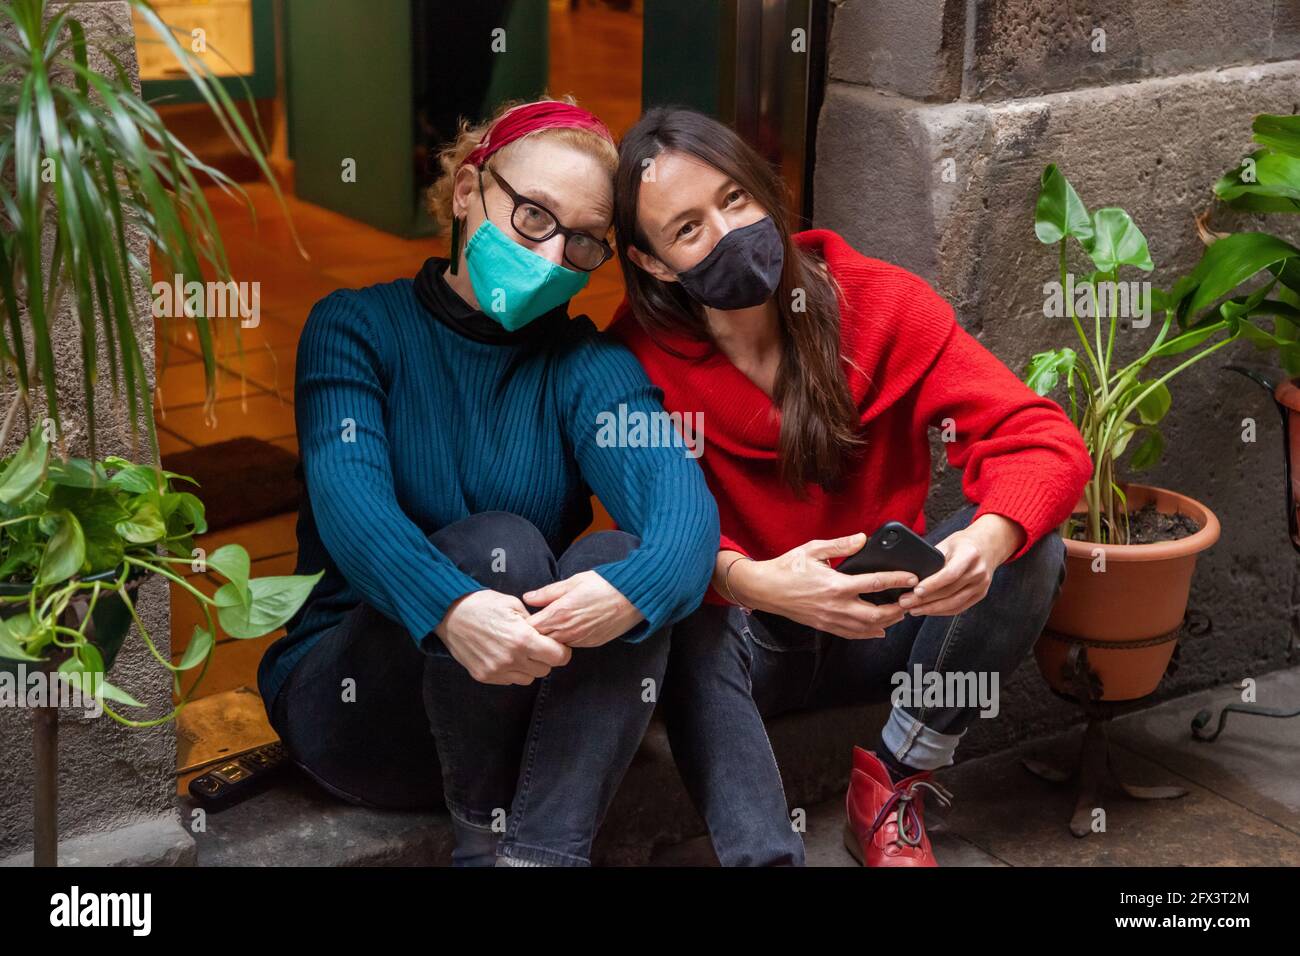 Portrait of two middle-aged women friends with protective face masks sitting close together in the entrance of their shop. Concept: working during cor Stock Photo